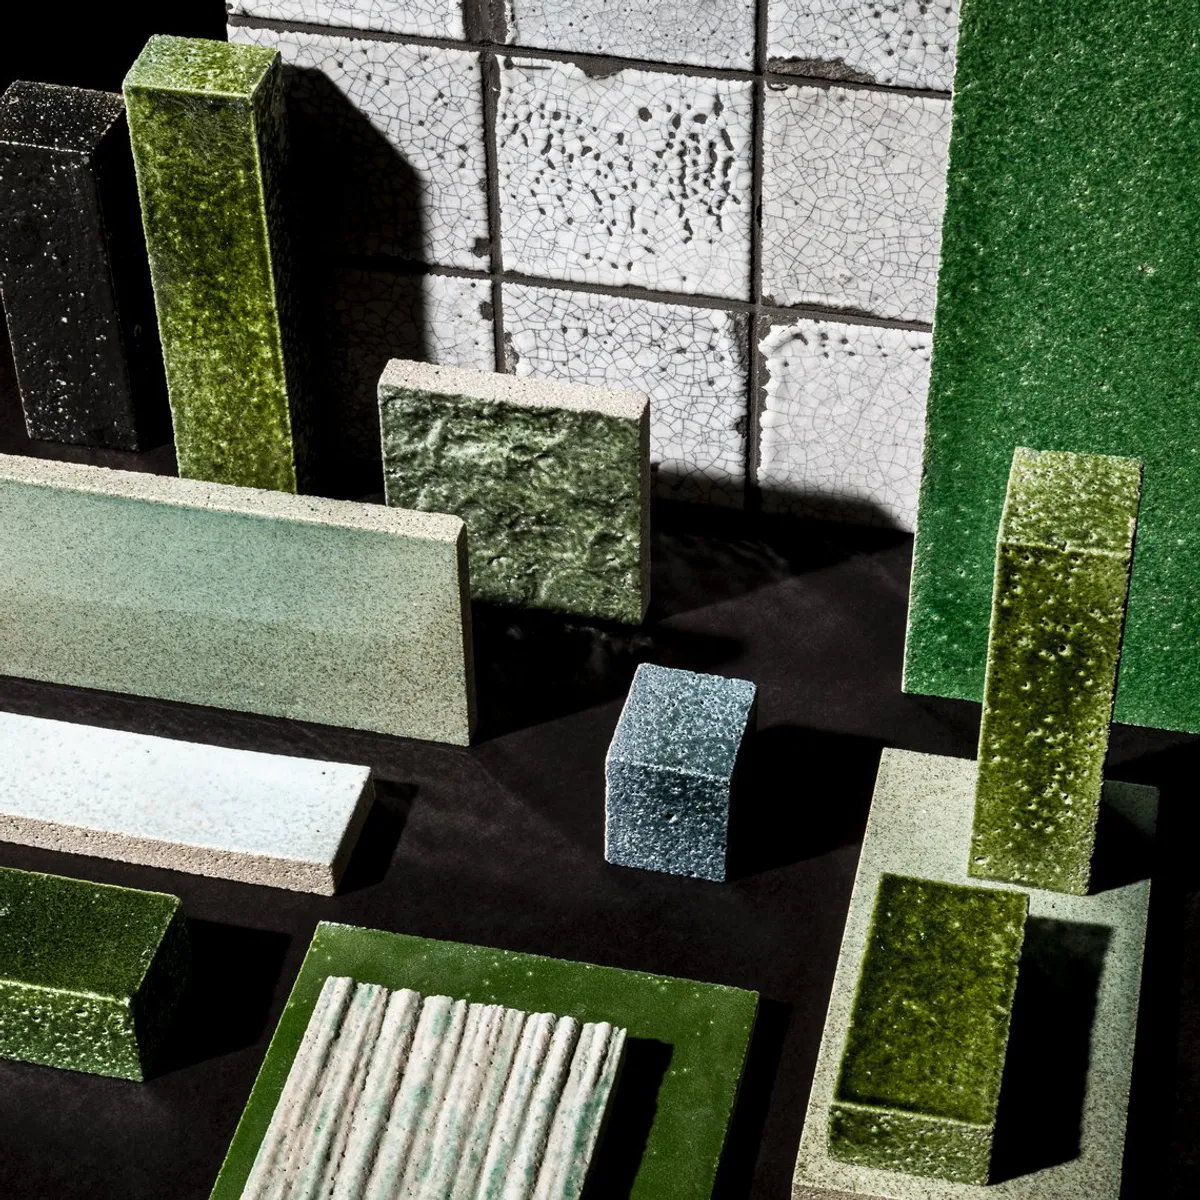 Silicastone Samples Crackled Surface Green Inside Out Contracts